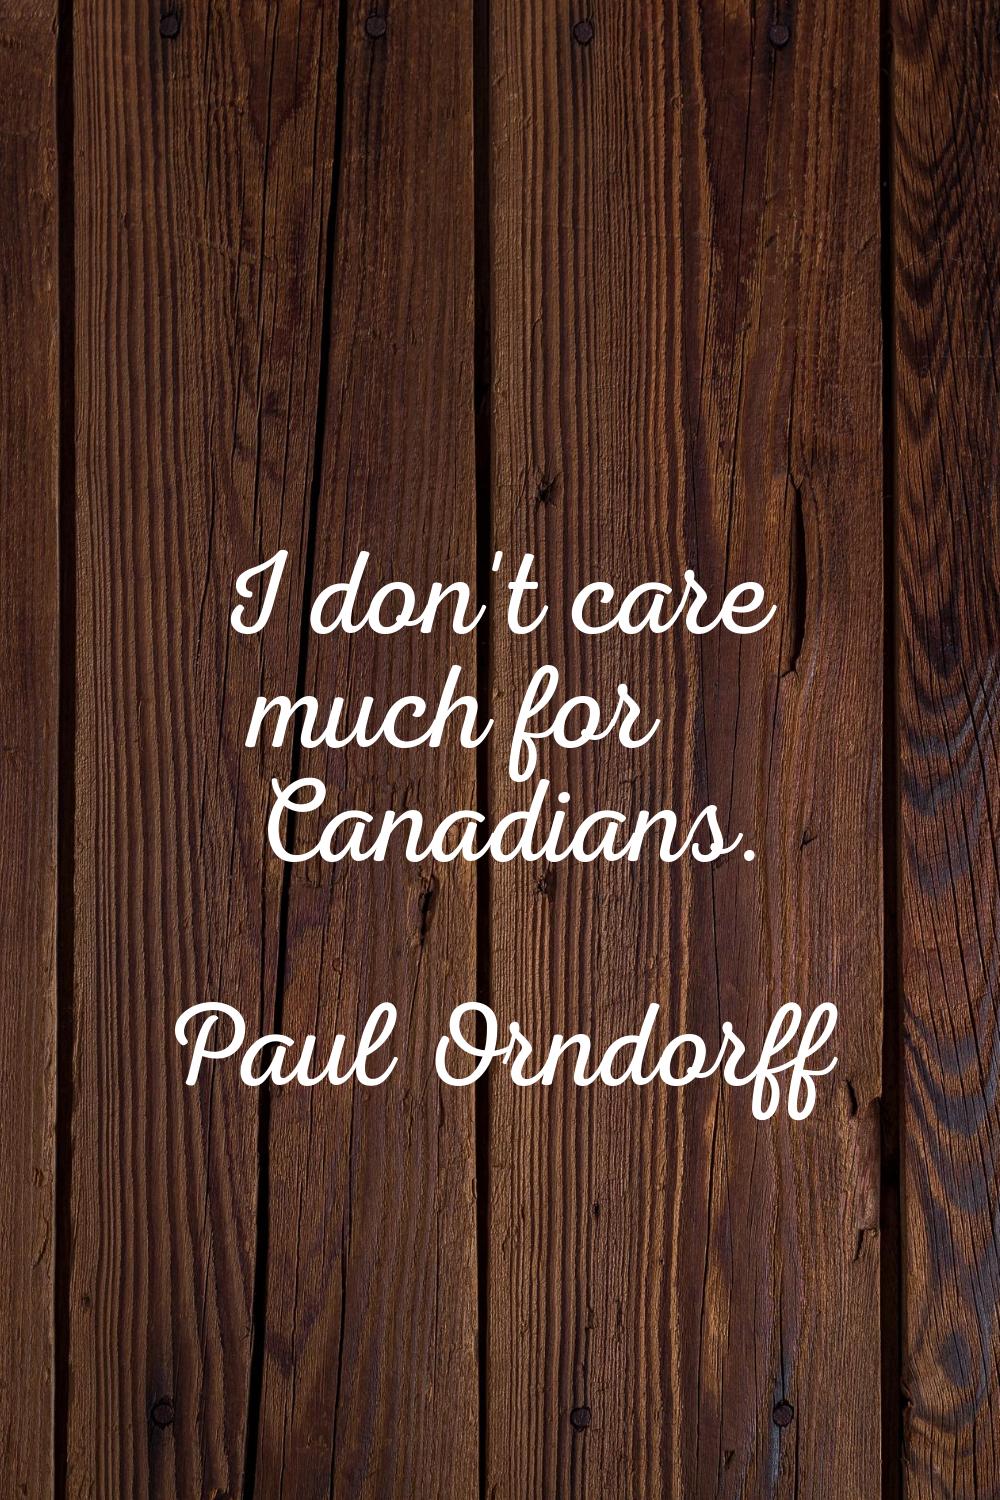 I don't care much for Canadians.